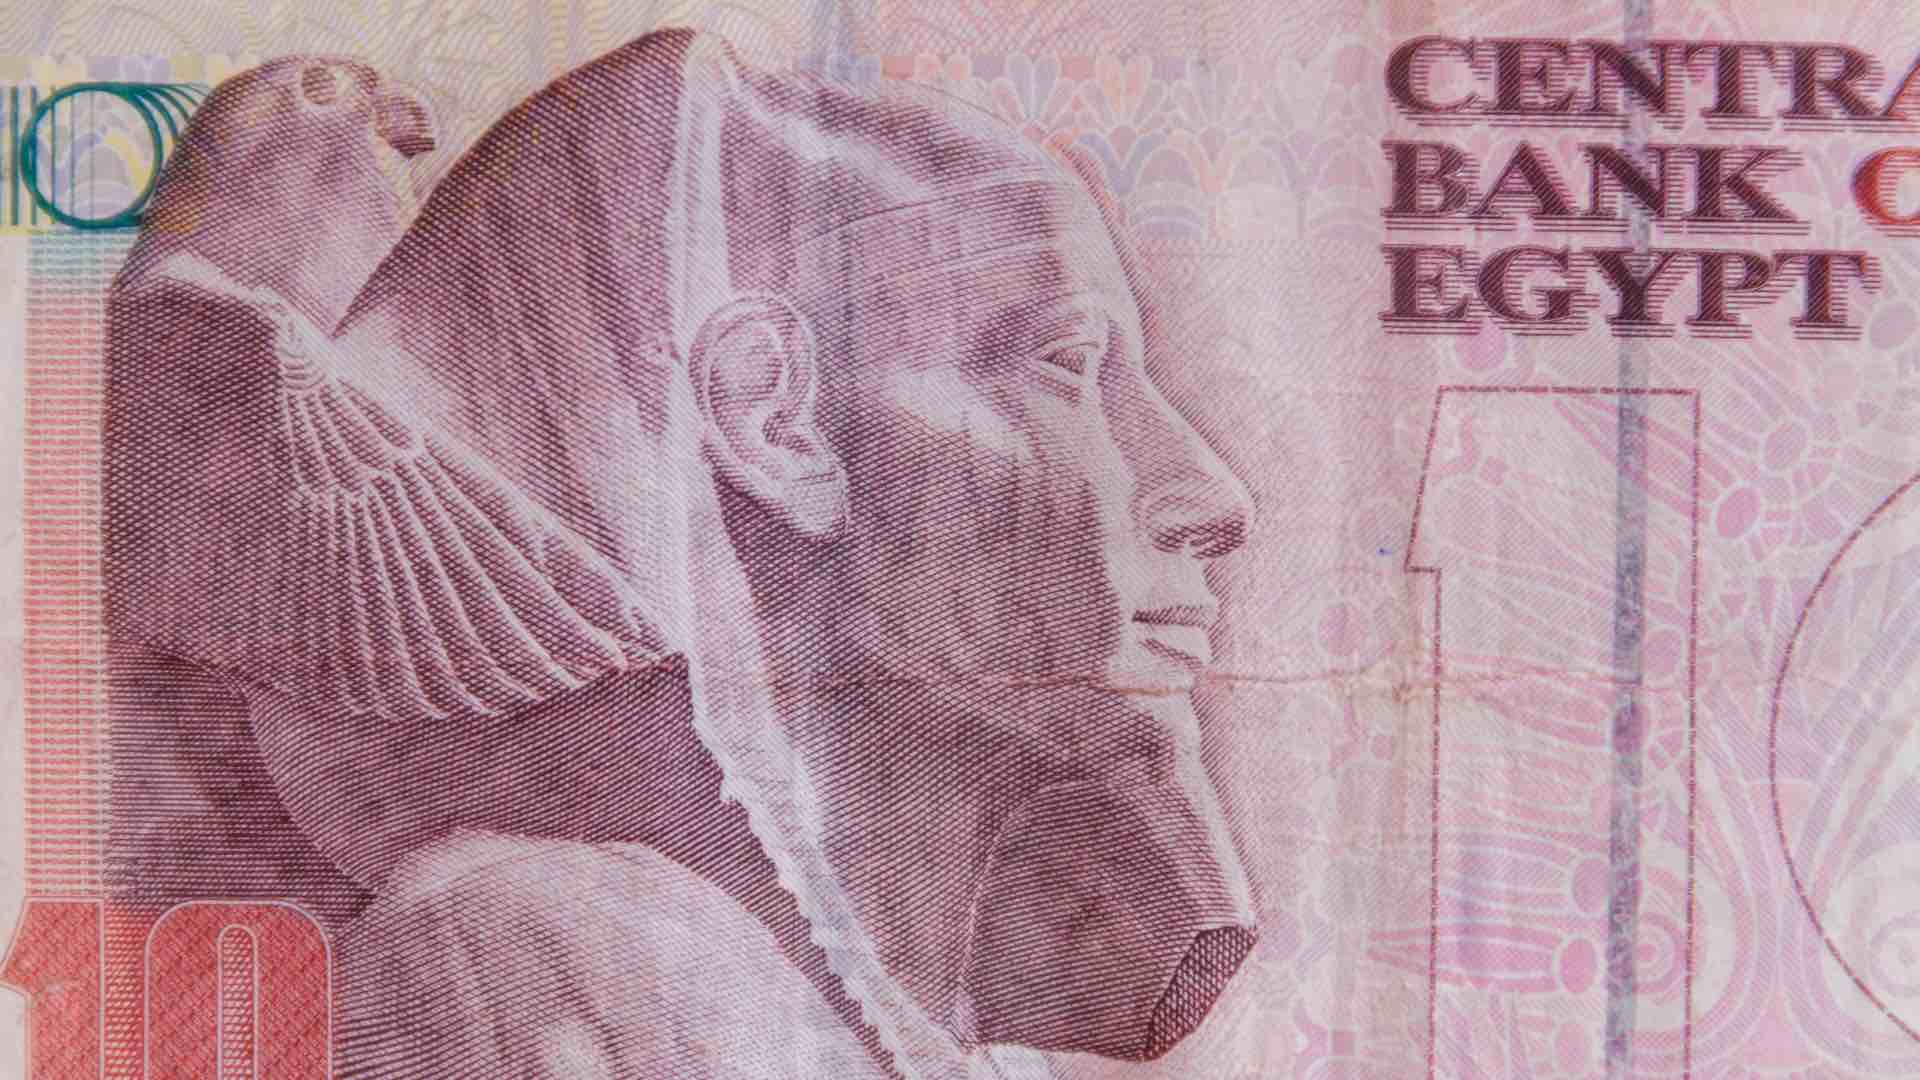 Central bank of Egypt unleashes bold monetary measures